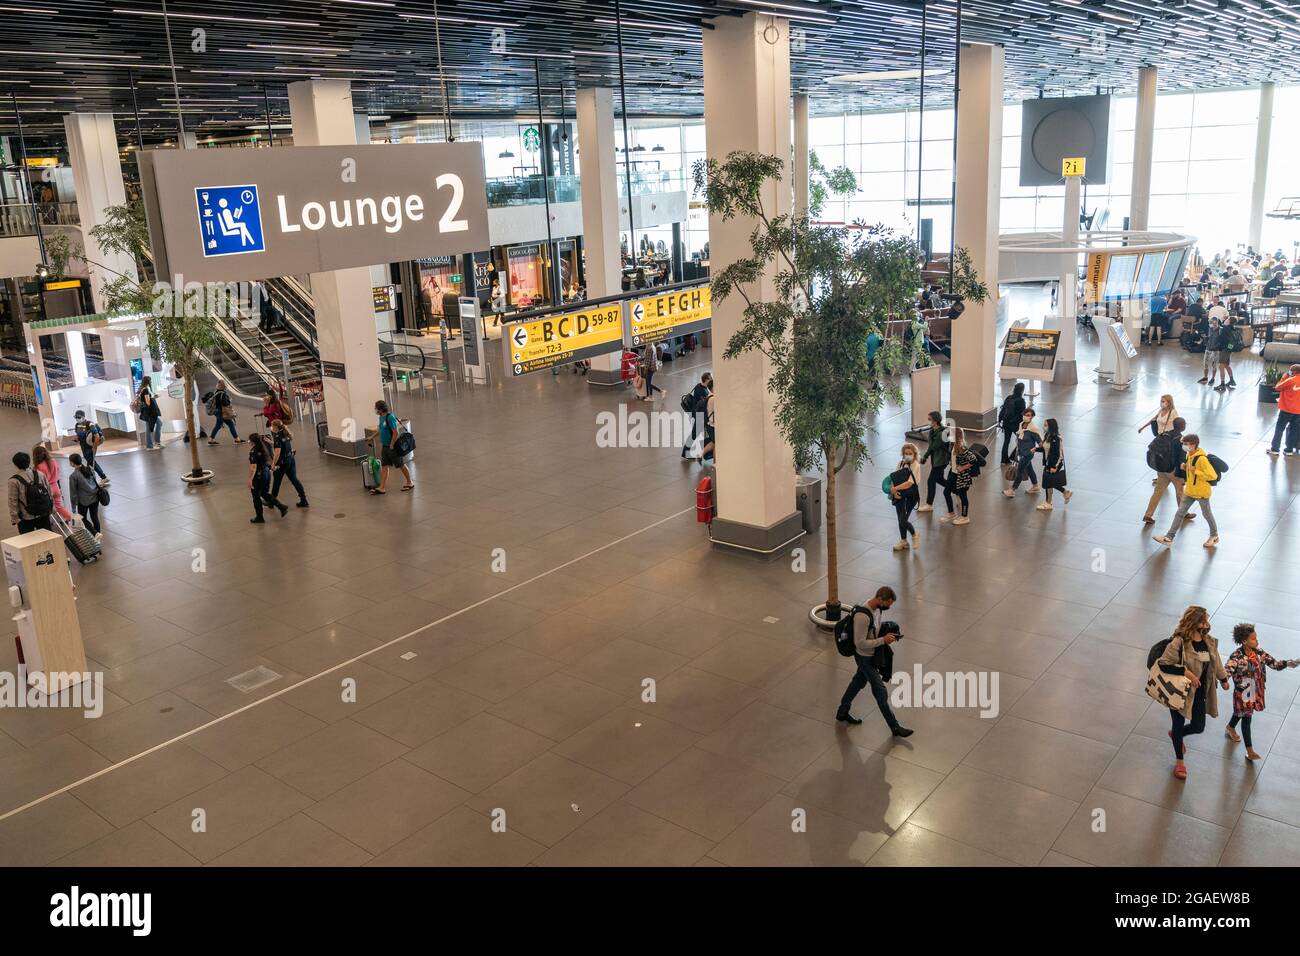 Amsterdam, the Netherlands - July 29, 2021: Travelers walk through Shiphol airport. Fully vaccinated travelers are allowed to travel during pandemic but required to wear masks at airports and while on aircrafts. Stock Photo